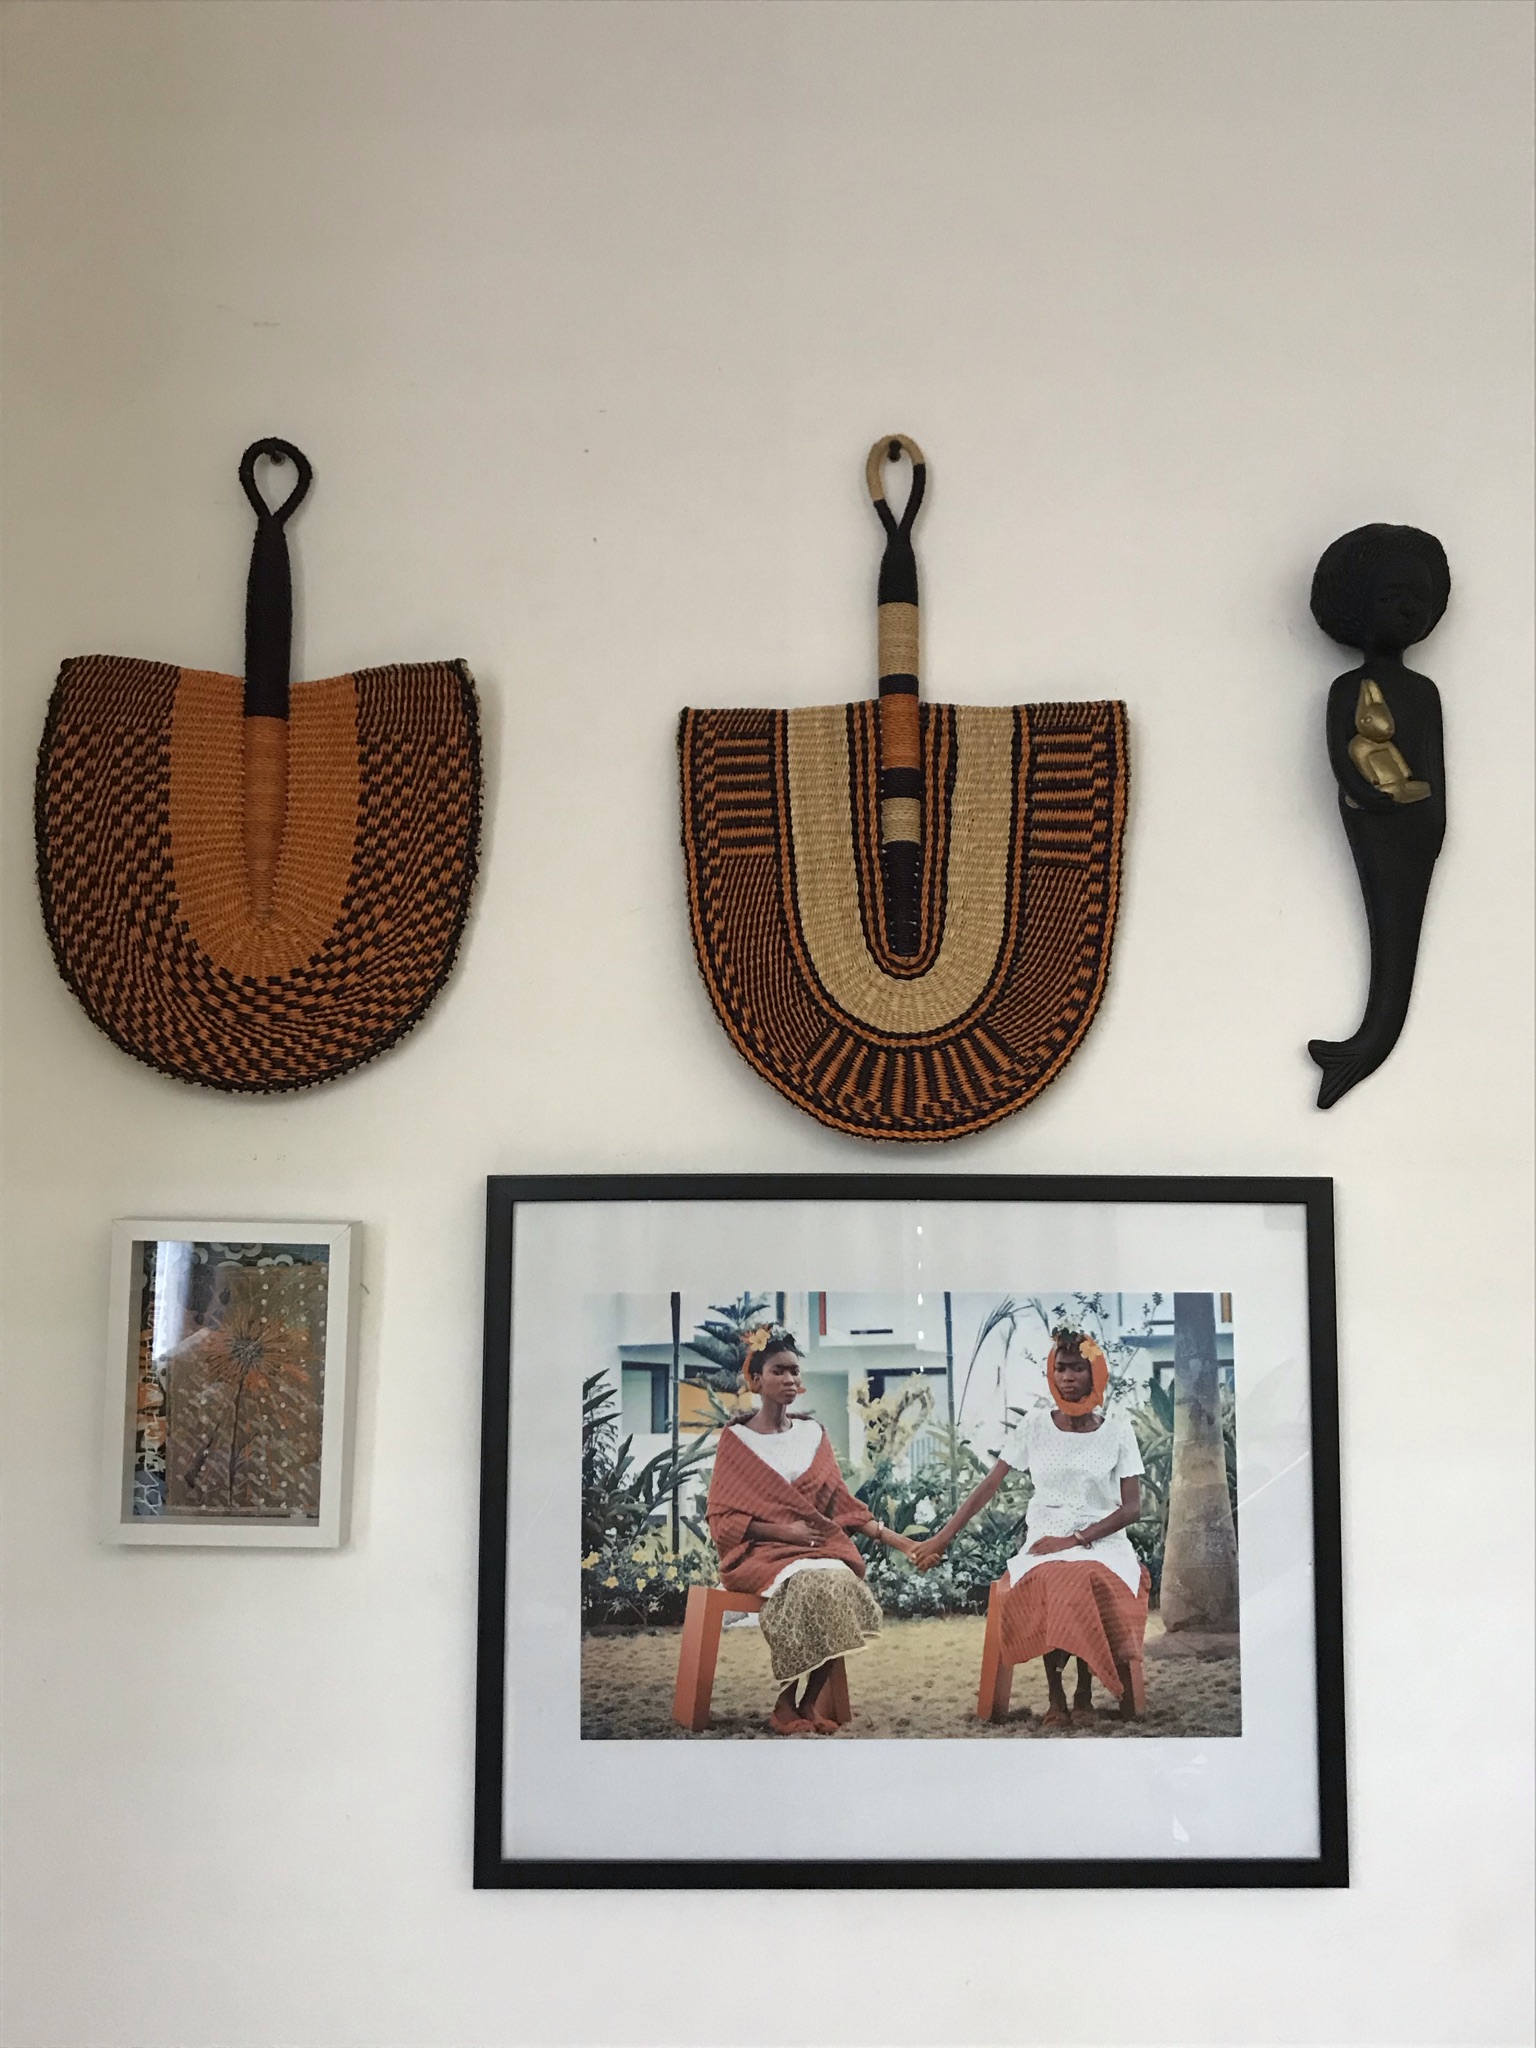 Zodwa the mermaid by Noush Projects Manoushka Kraal hanging on a wall with Bolgatanga fans